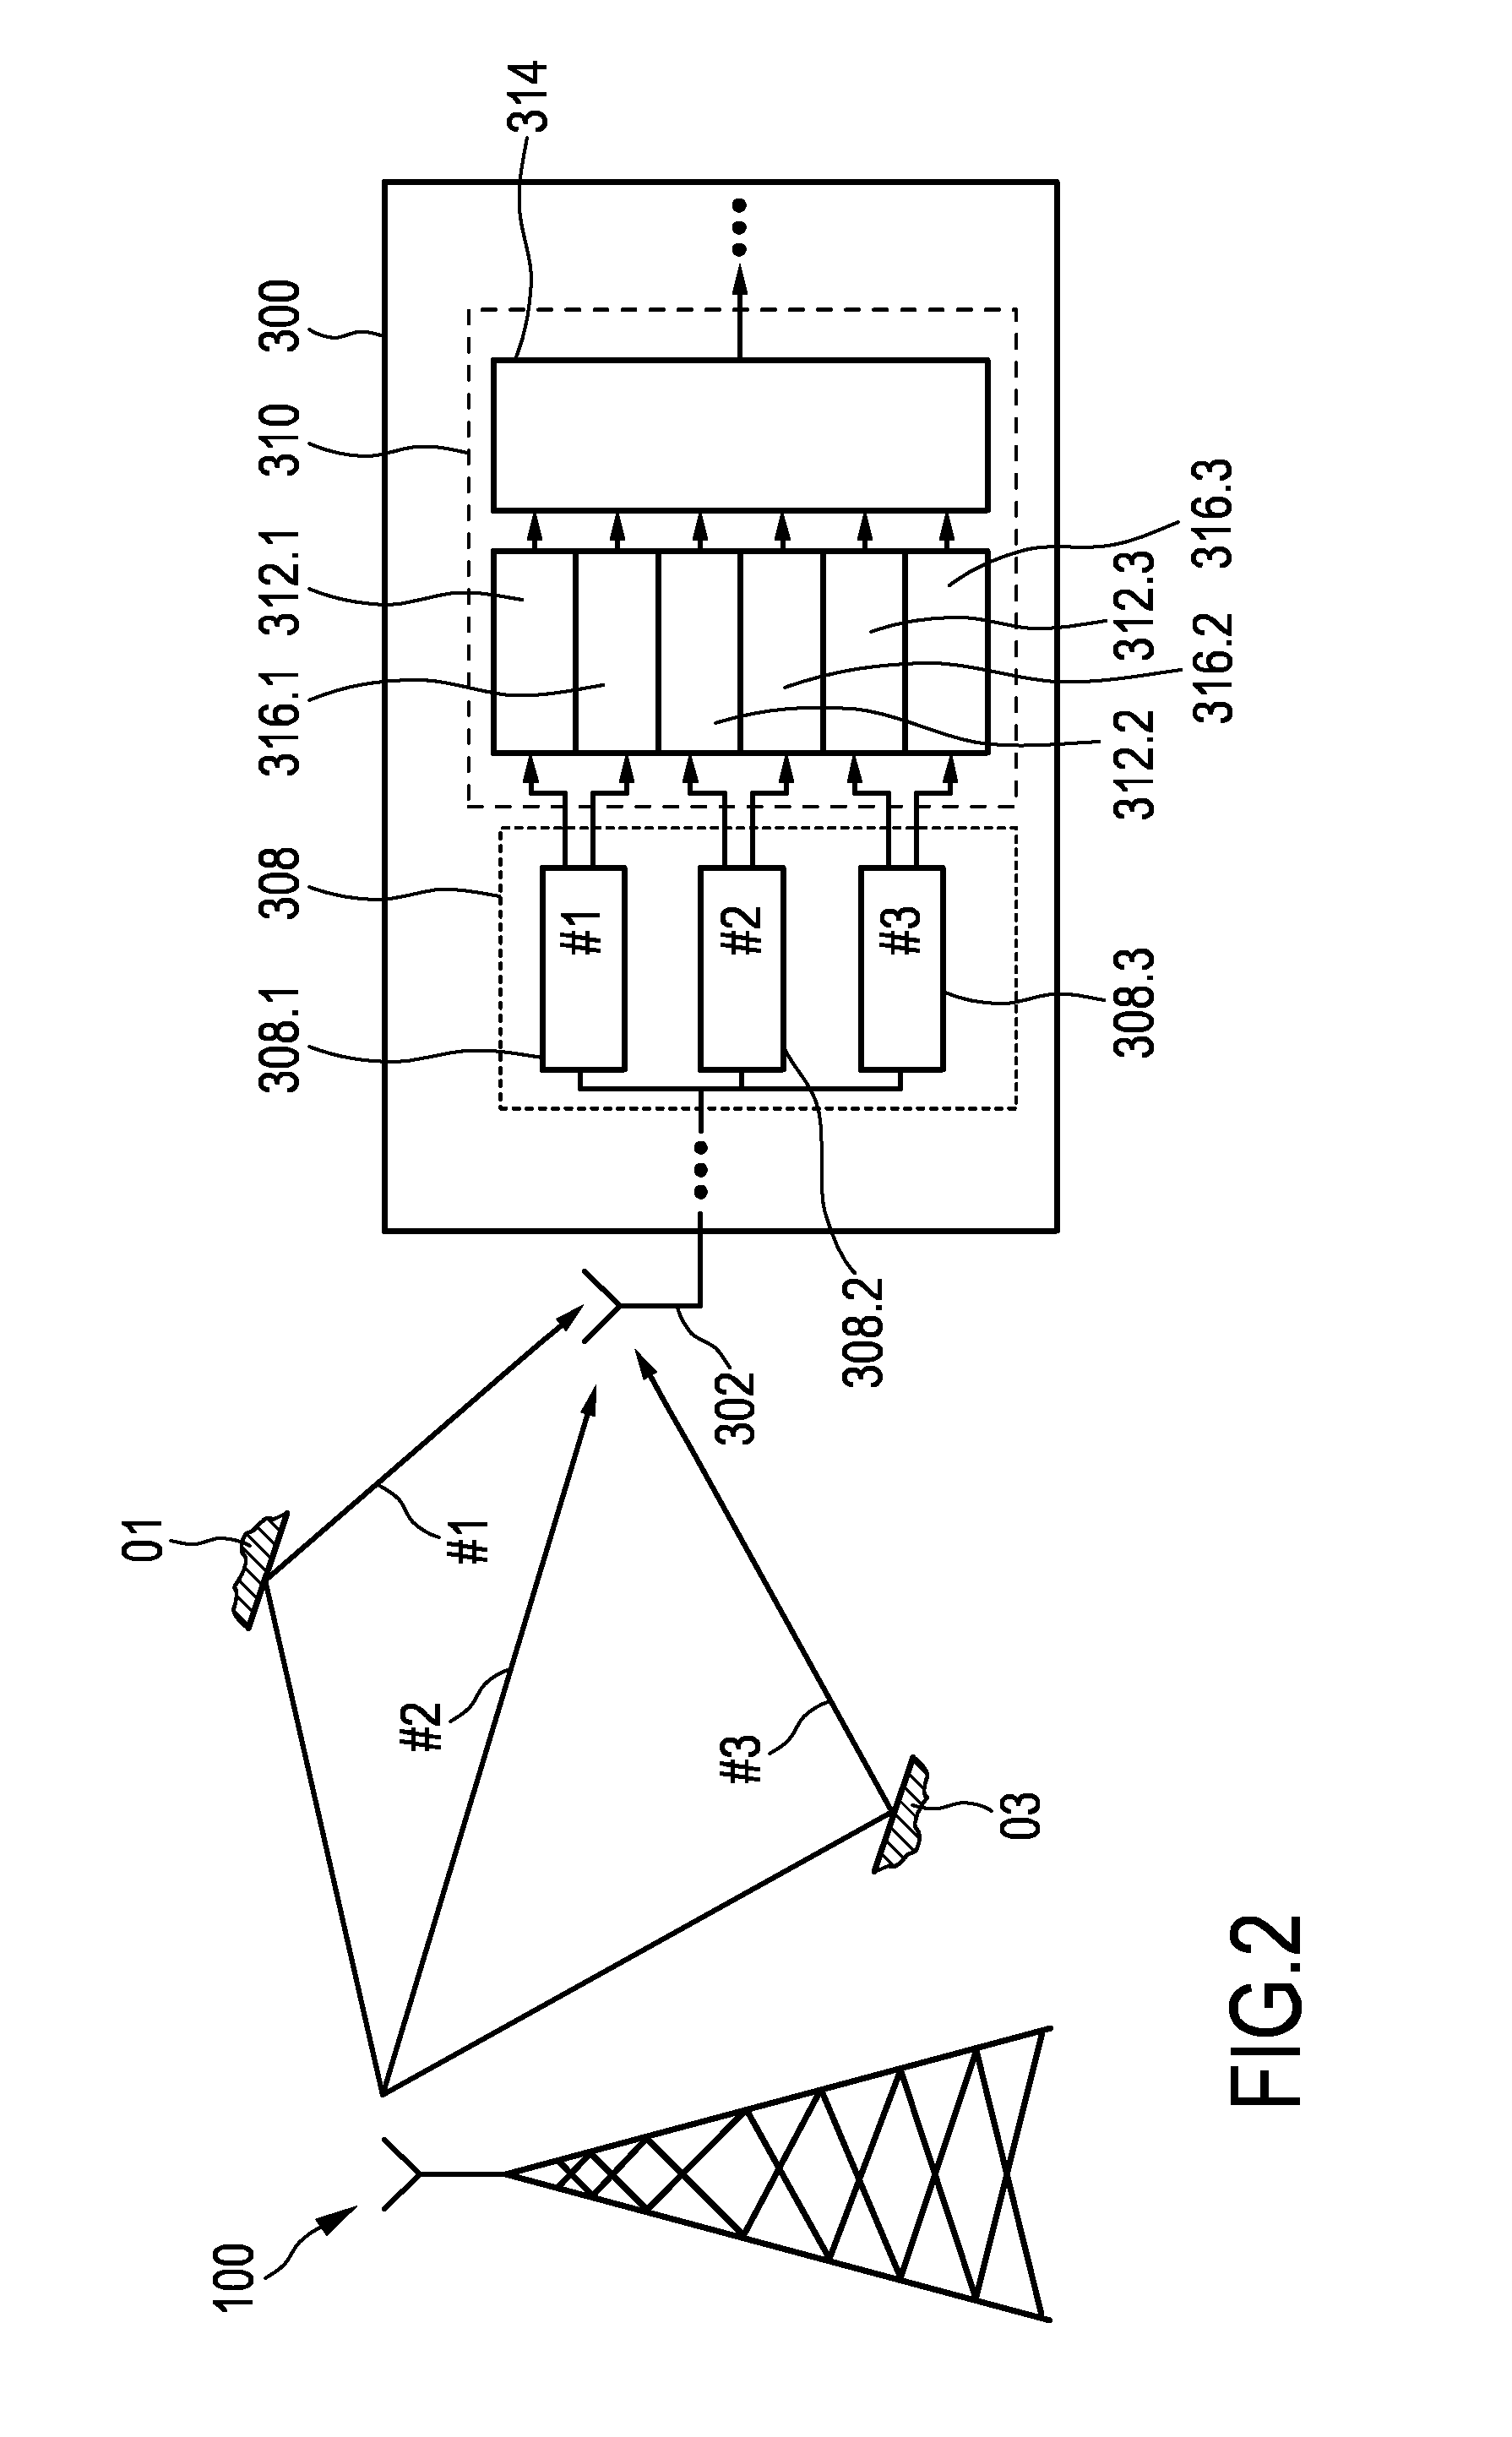 Correlation-driven adaptation of frequency control for a RF receiver device